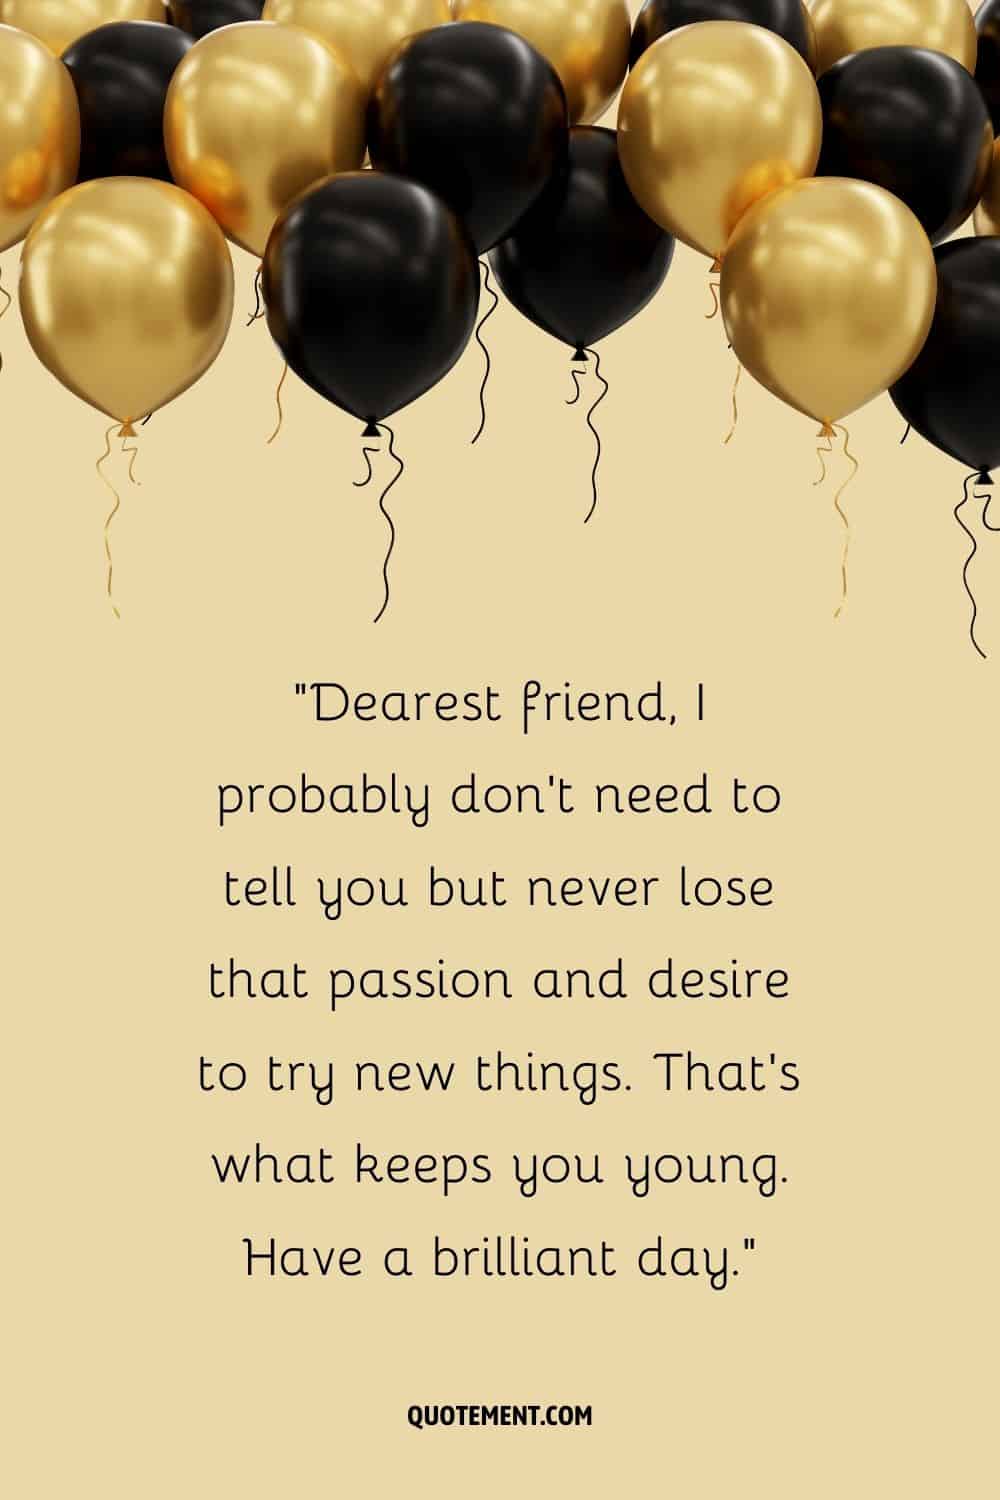 black and golden balloons on a being background
